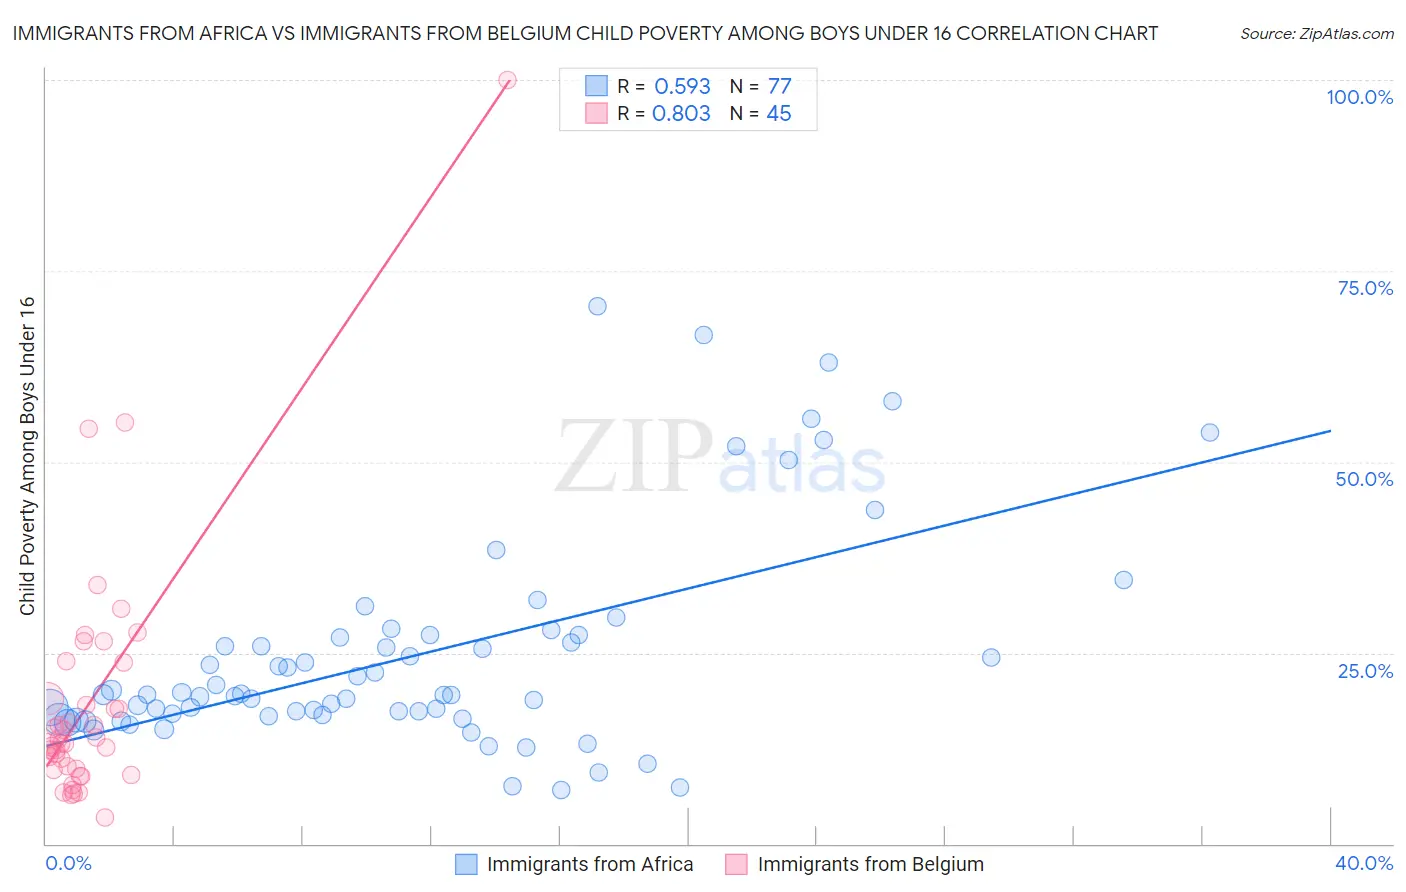 Immigrants from Africa vs Immigrants from Belgium Child Poverty Among Boys Under 16